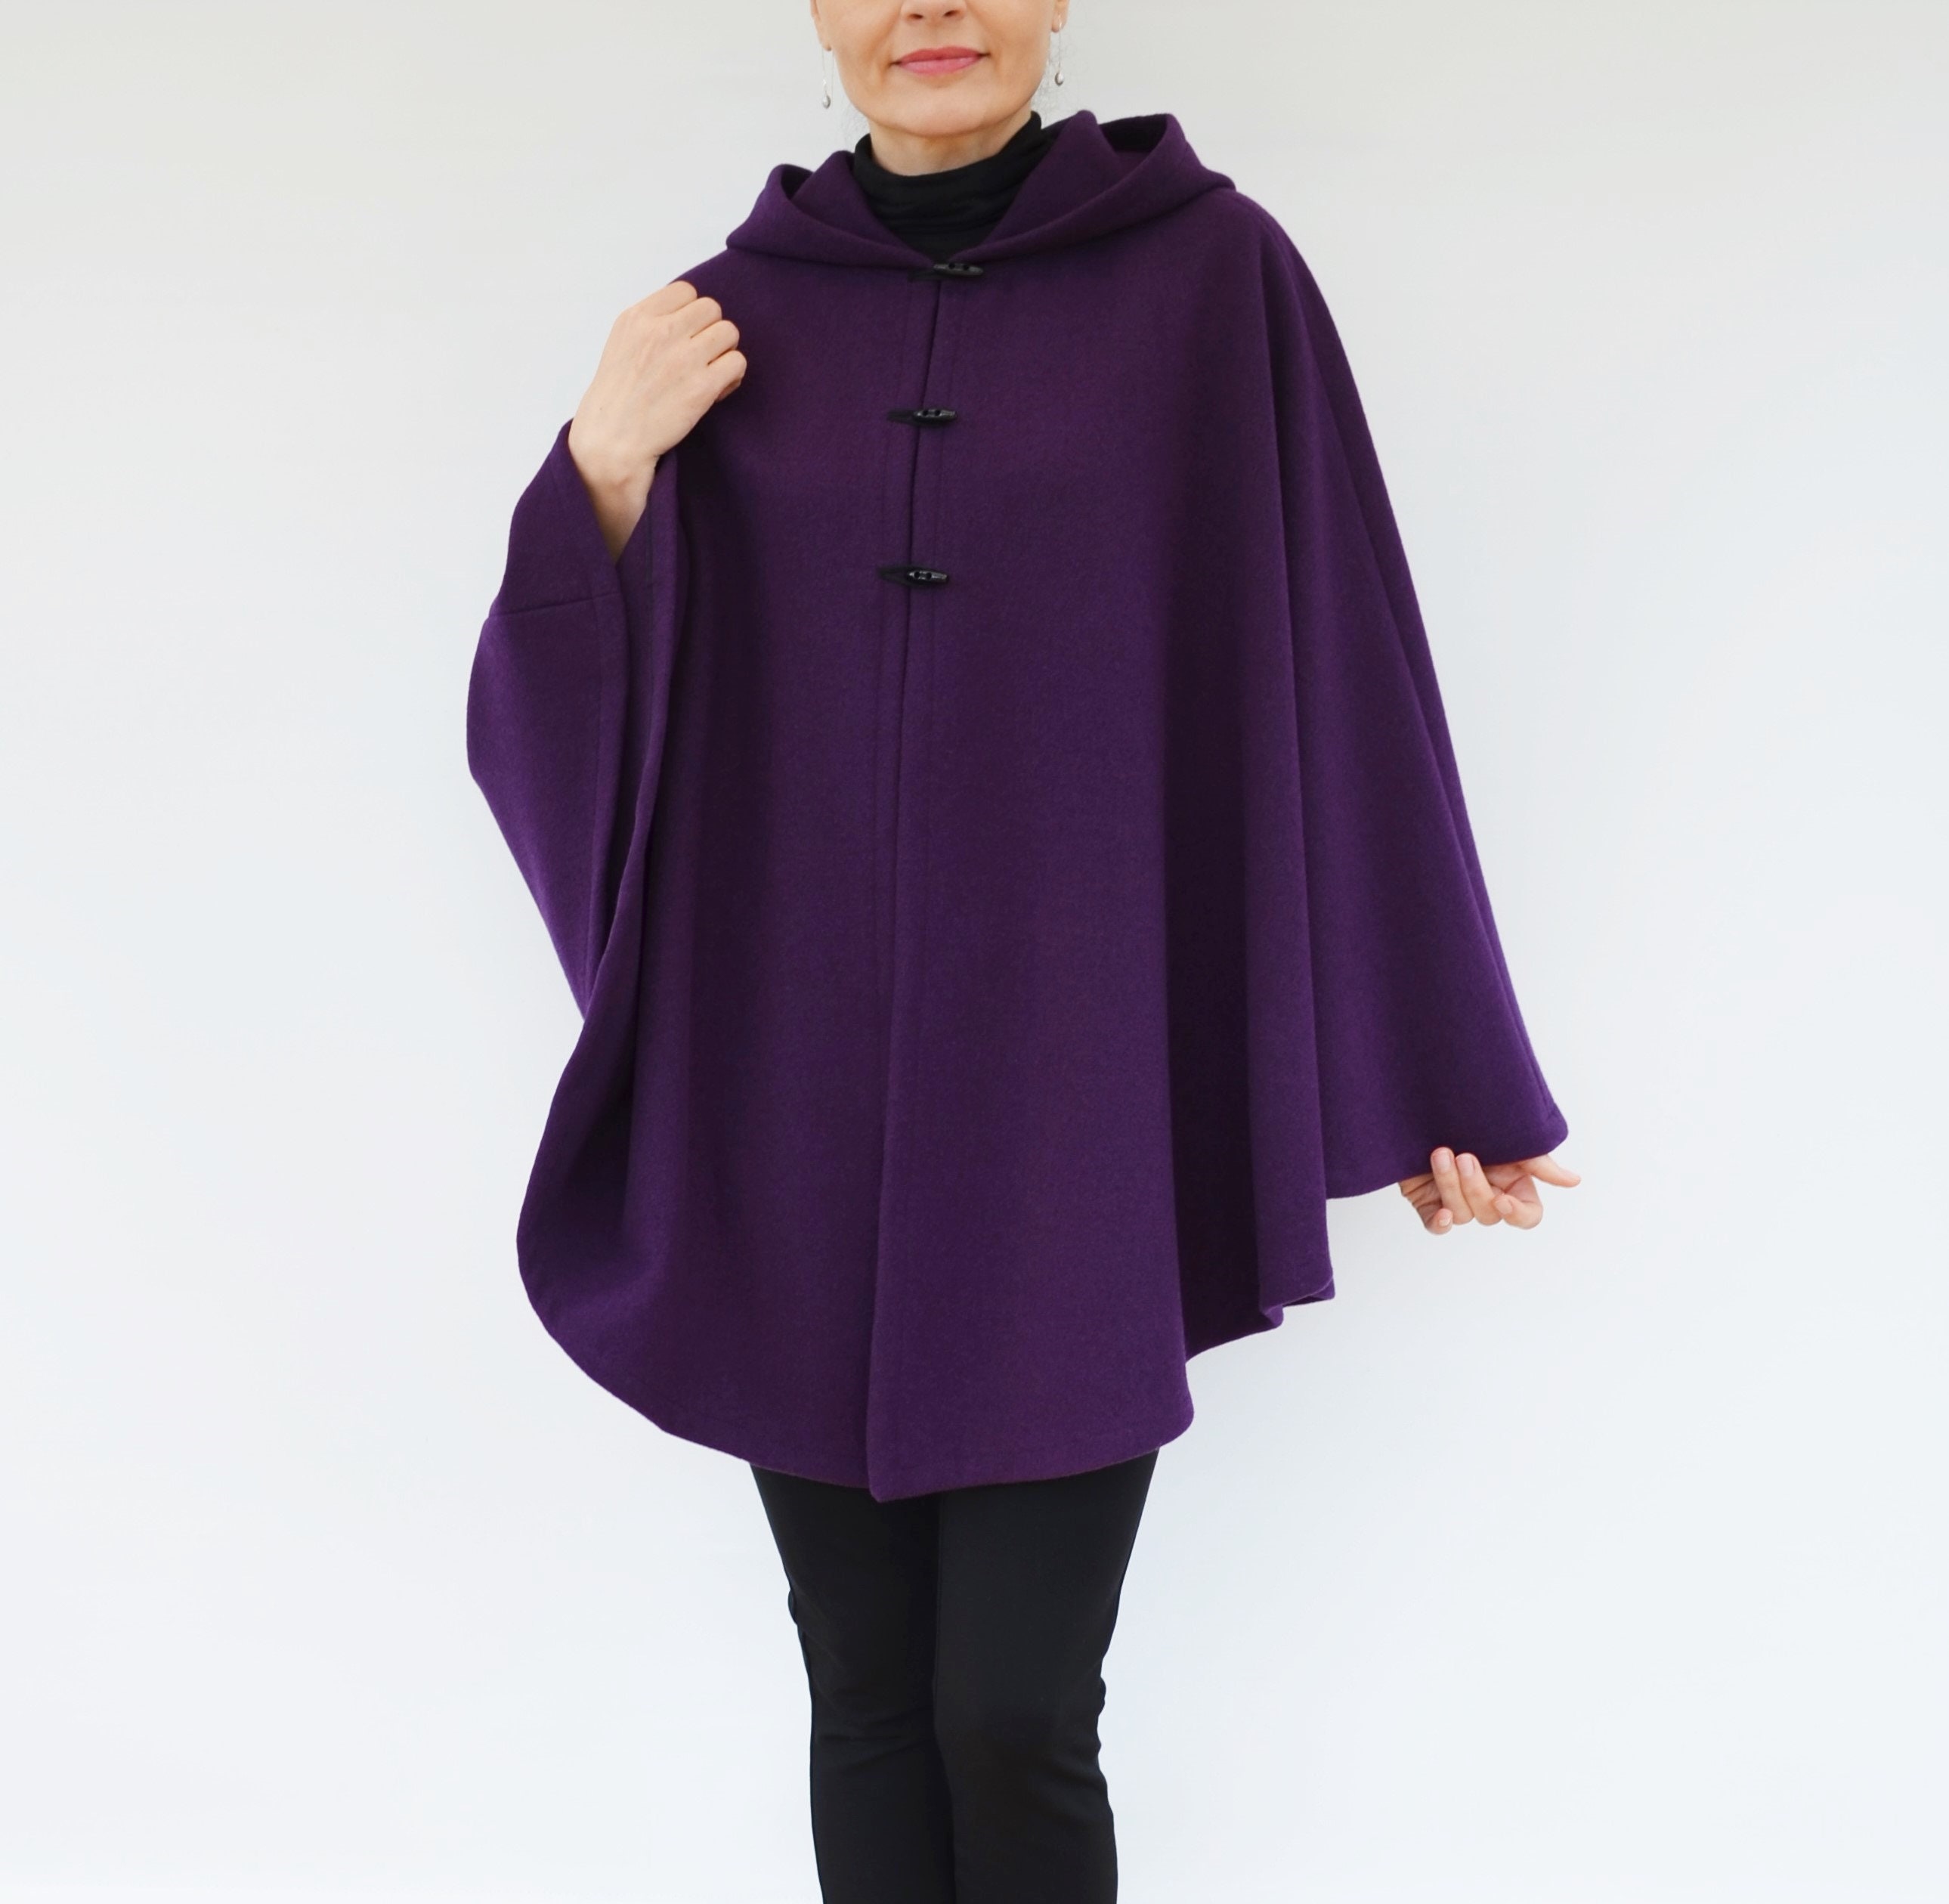 Burgundy or Red Hooded Cloak, Soft Fleece Cape Coat for Women Plus Size or  Standard Size, Handmade in Scotland